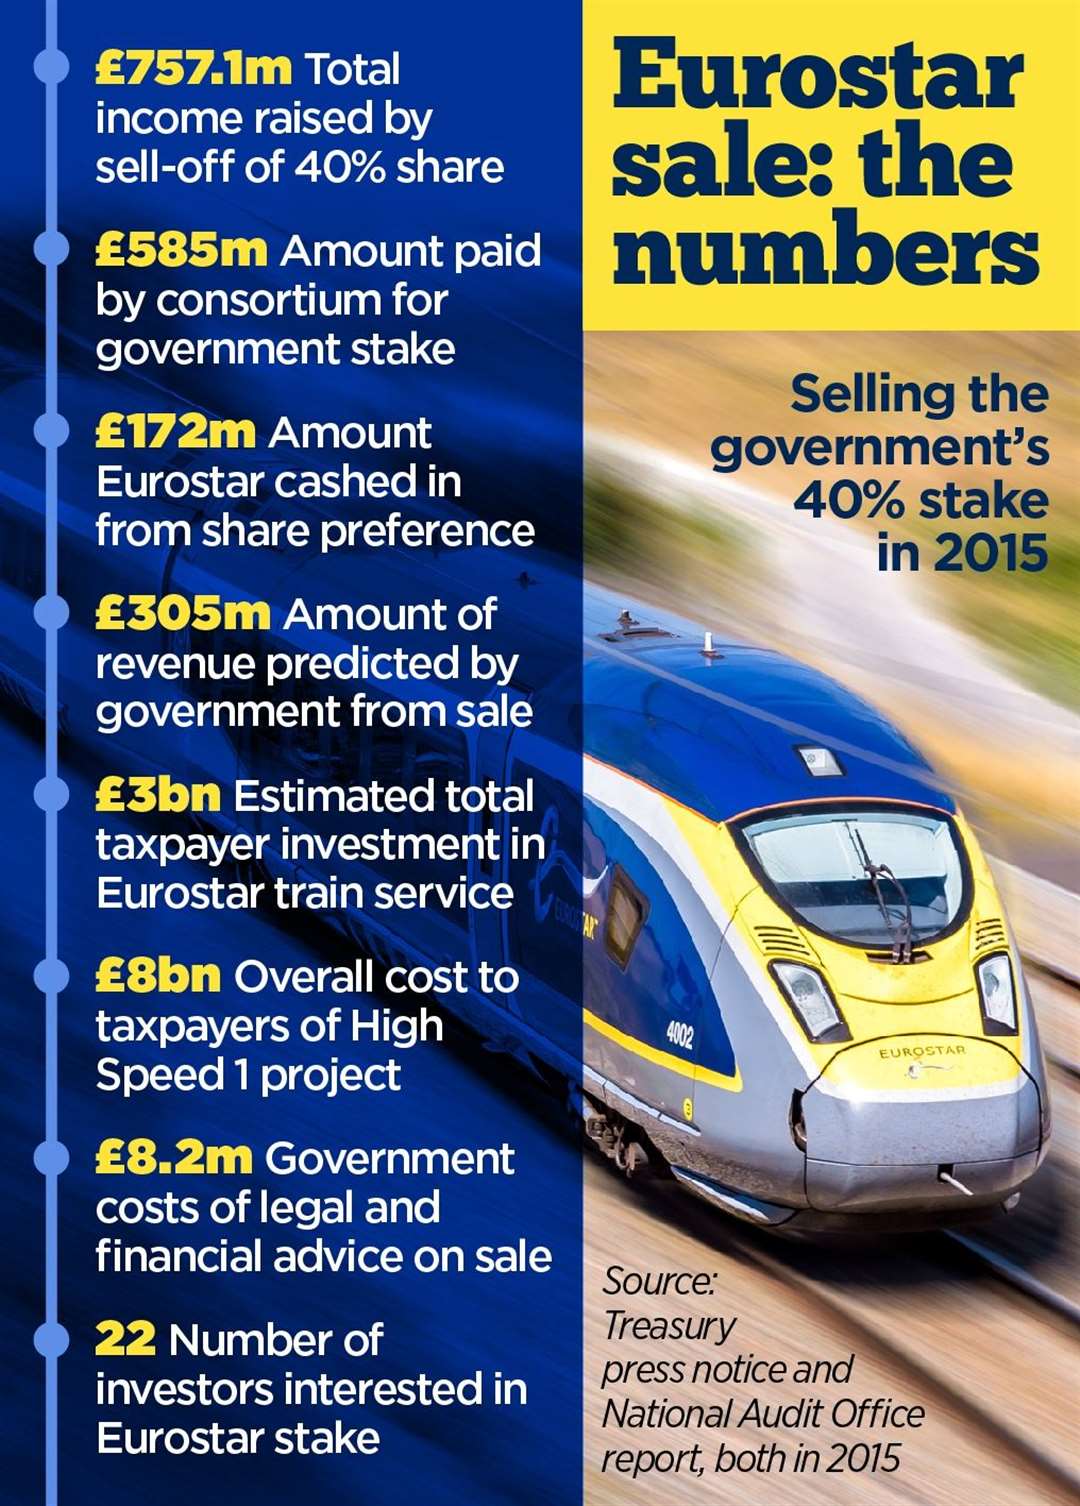 Was government right to sell its stake in Eurostar?